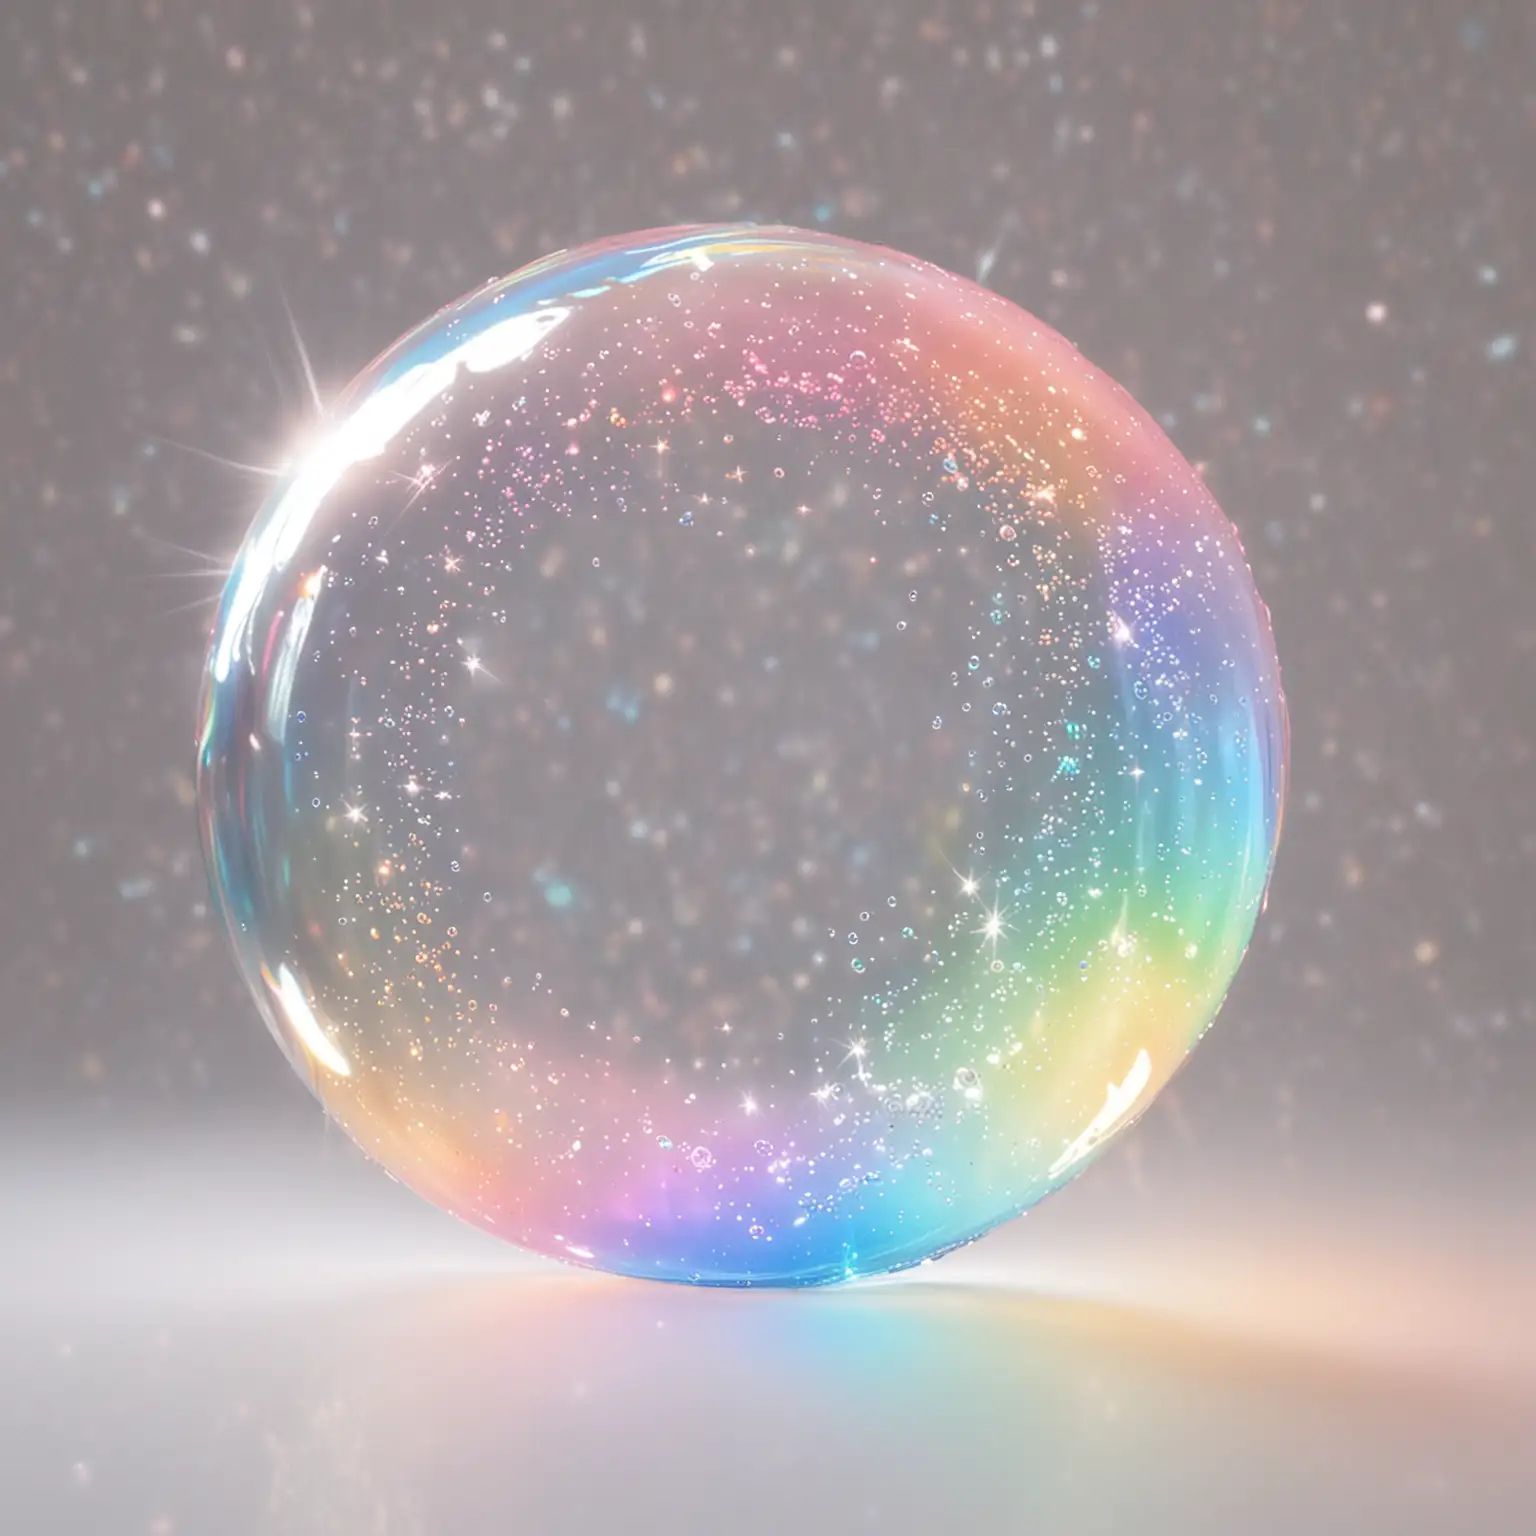 pastel rainbow sparkly bubble, radiating sparkles and bright white and rainbow light